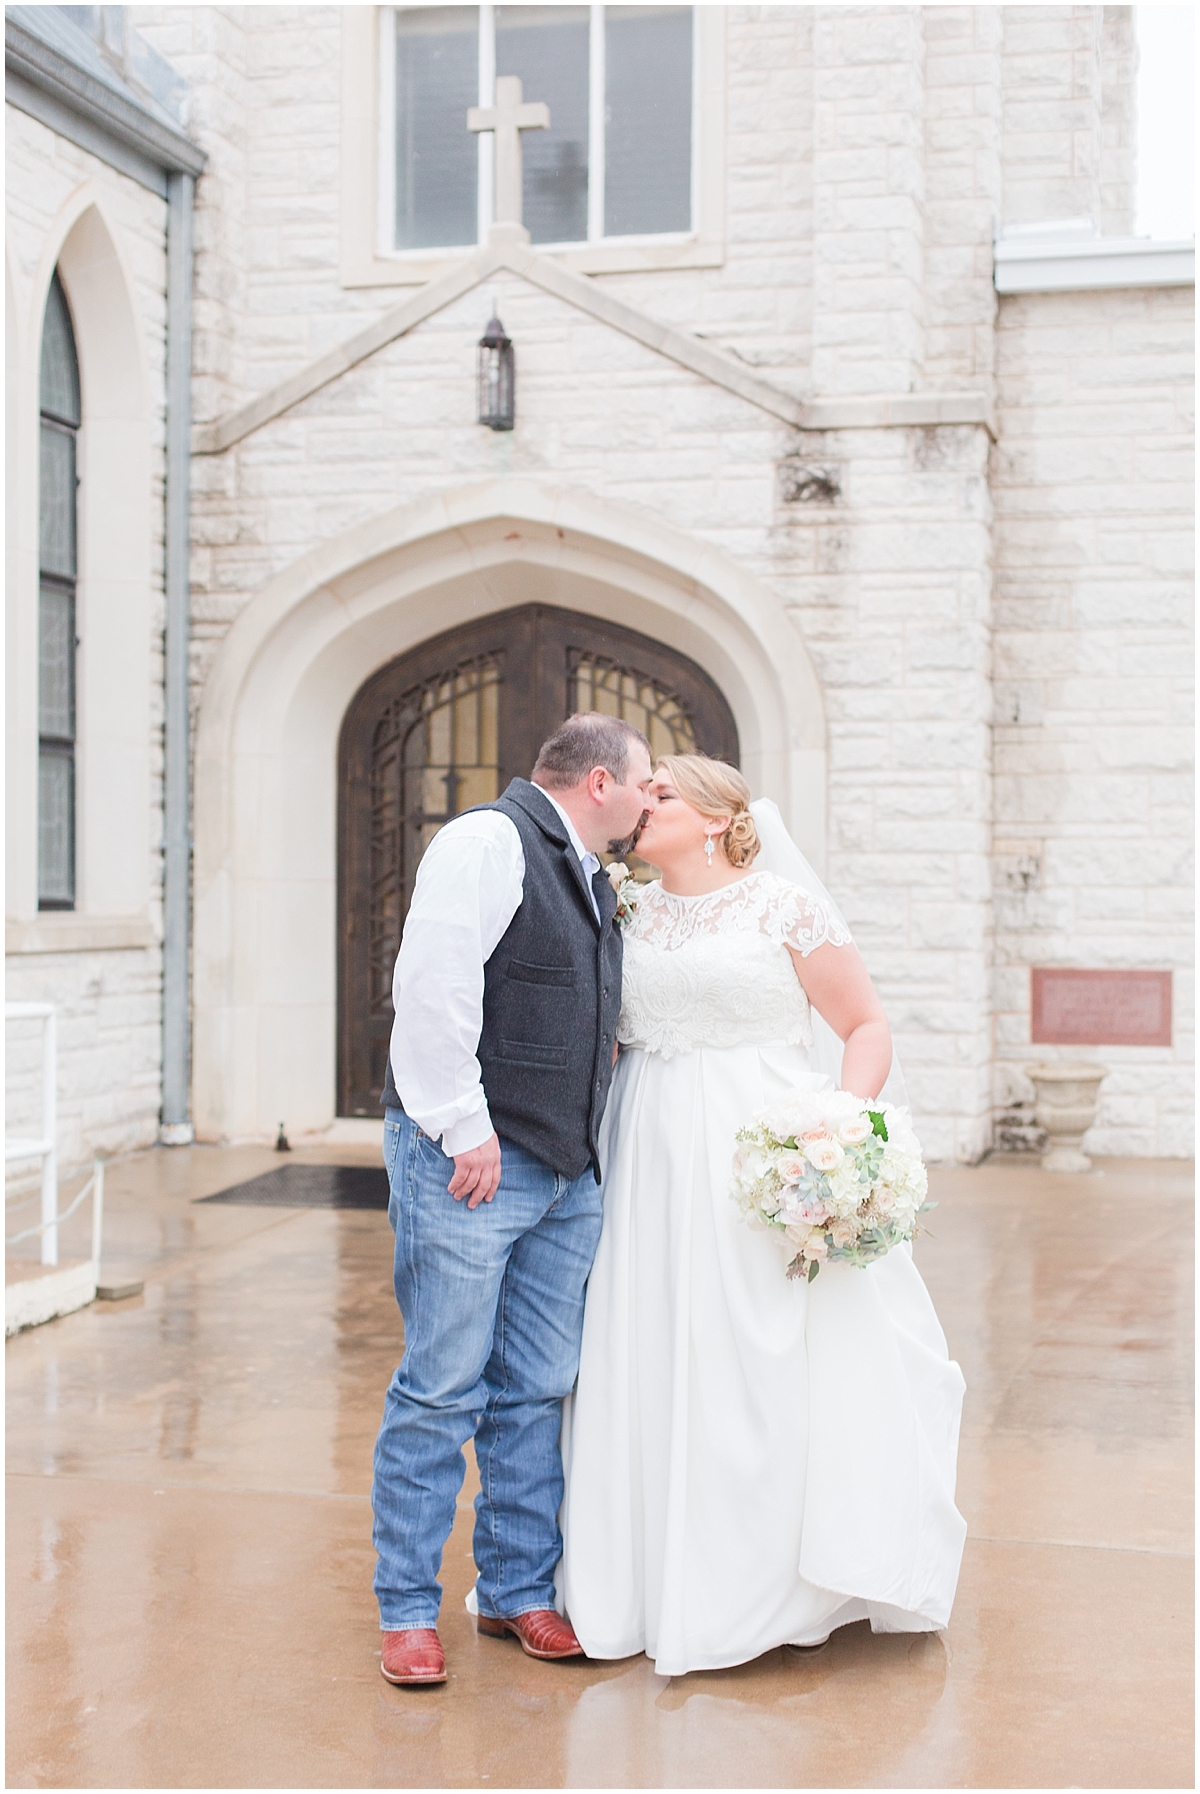 a-charcoal-grey-ivory-burgundy-winter-wedding-at-bethany-lutheran-church-in-fredericksburg-texas-by-allison-jeffers-wedding-photography-fredericksburg-wedding-photographer_0064